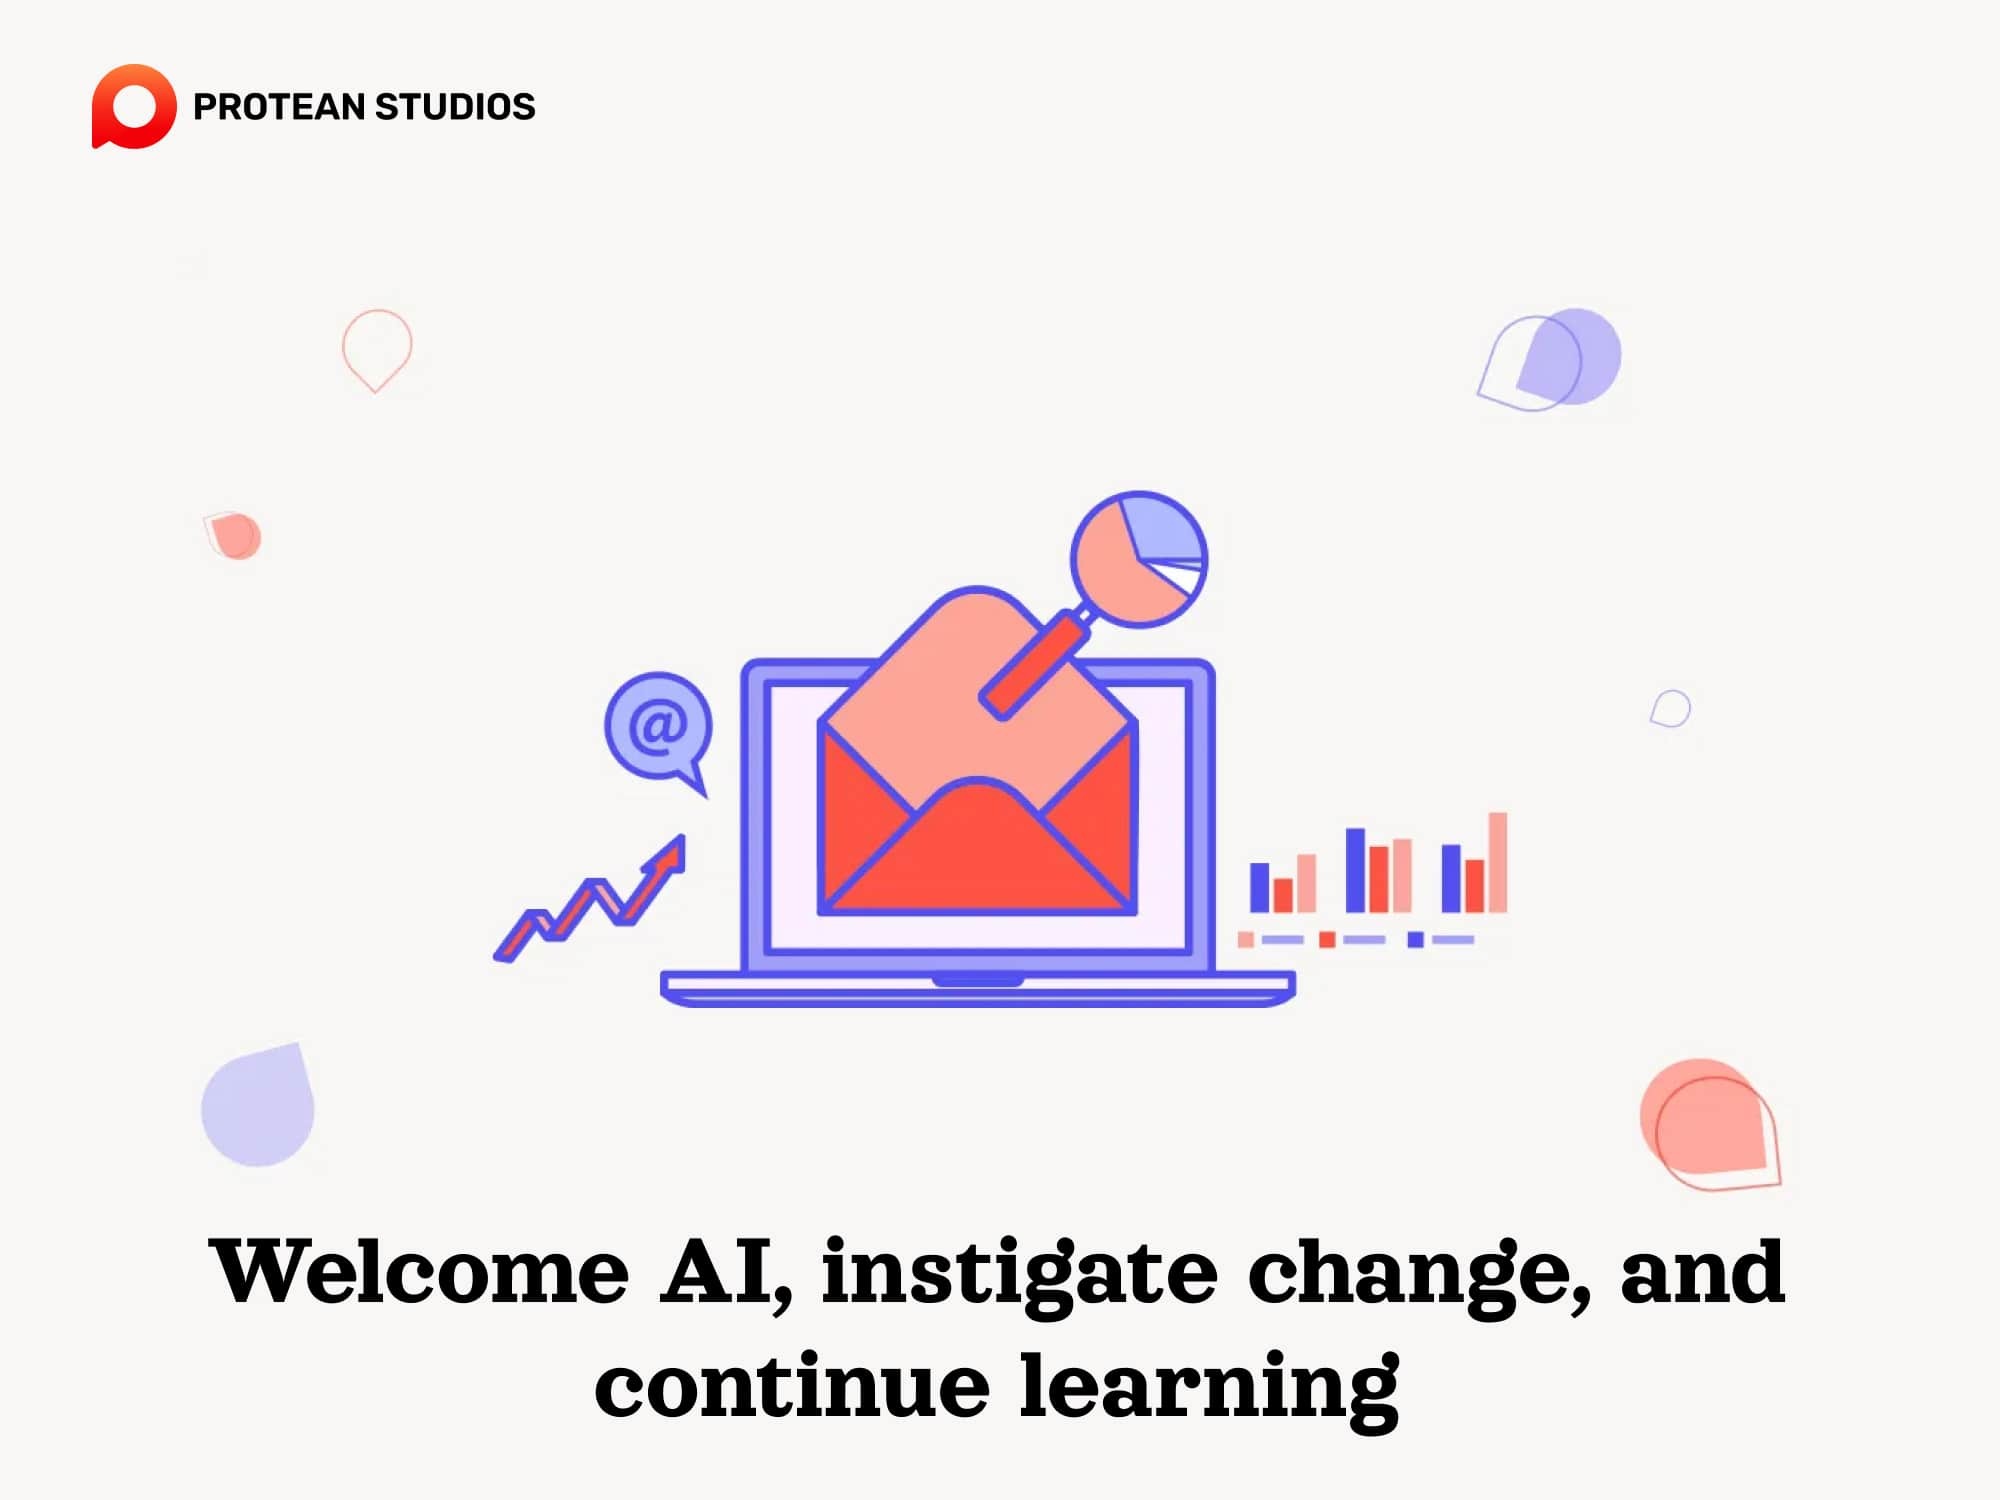 Welcome AI; instigate change for the better